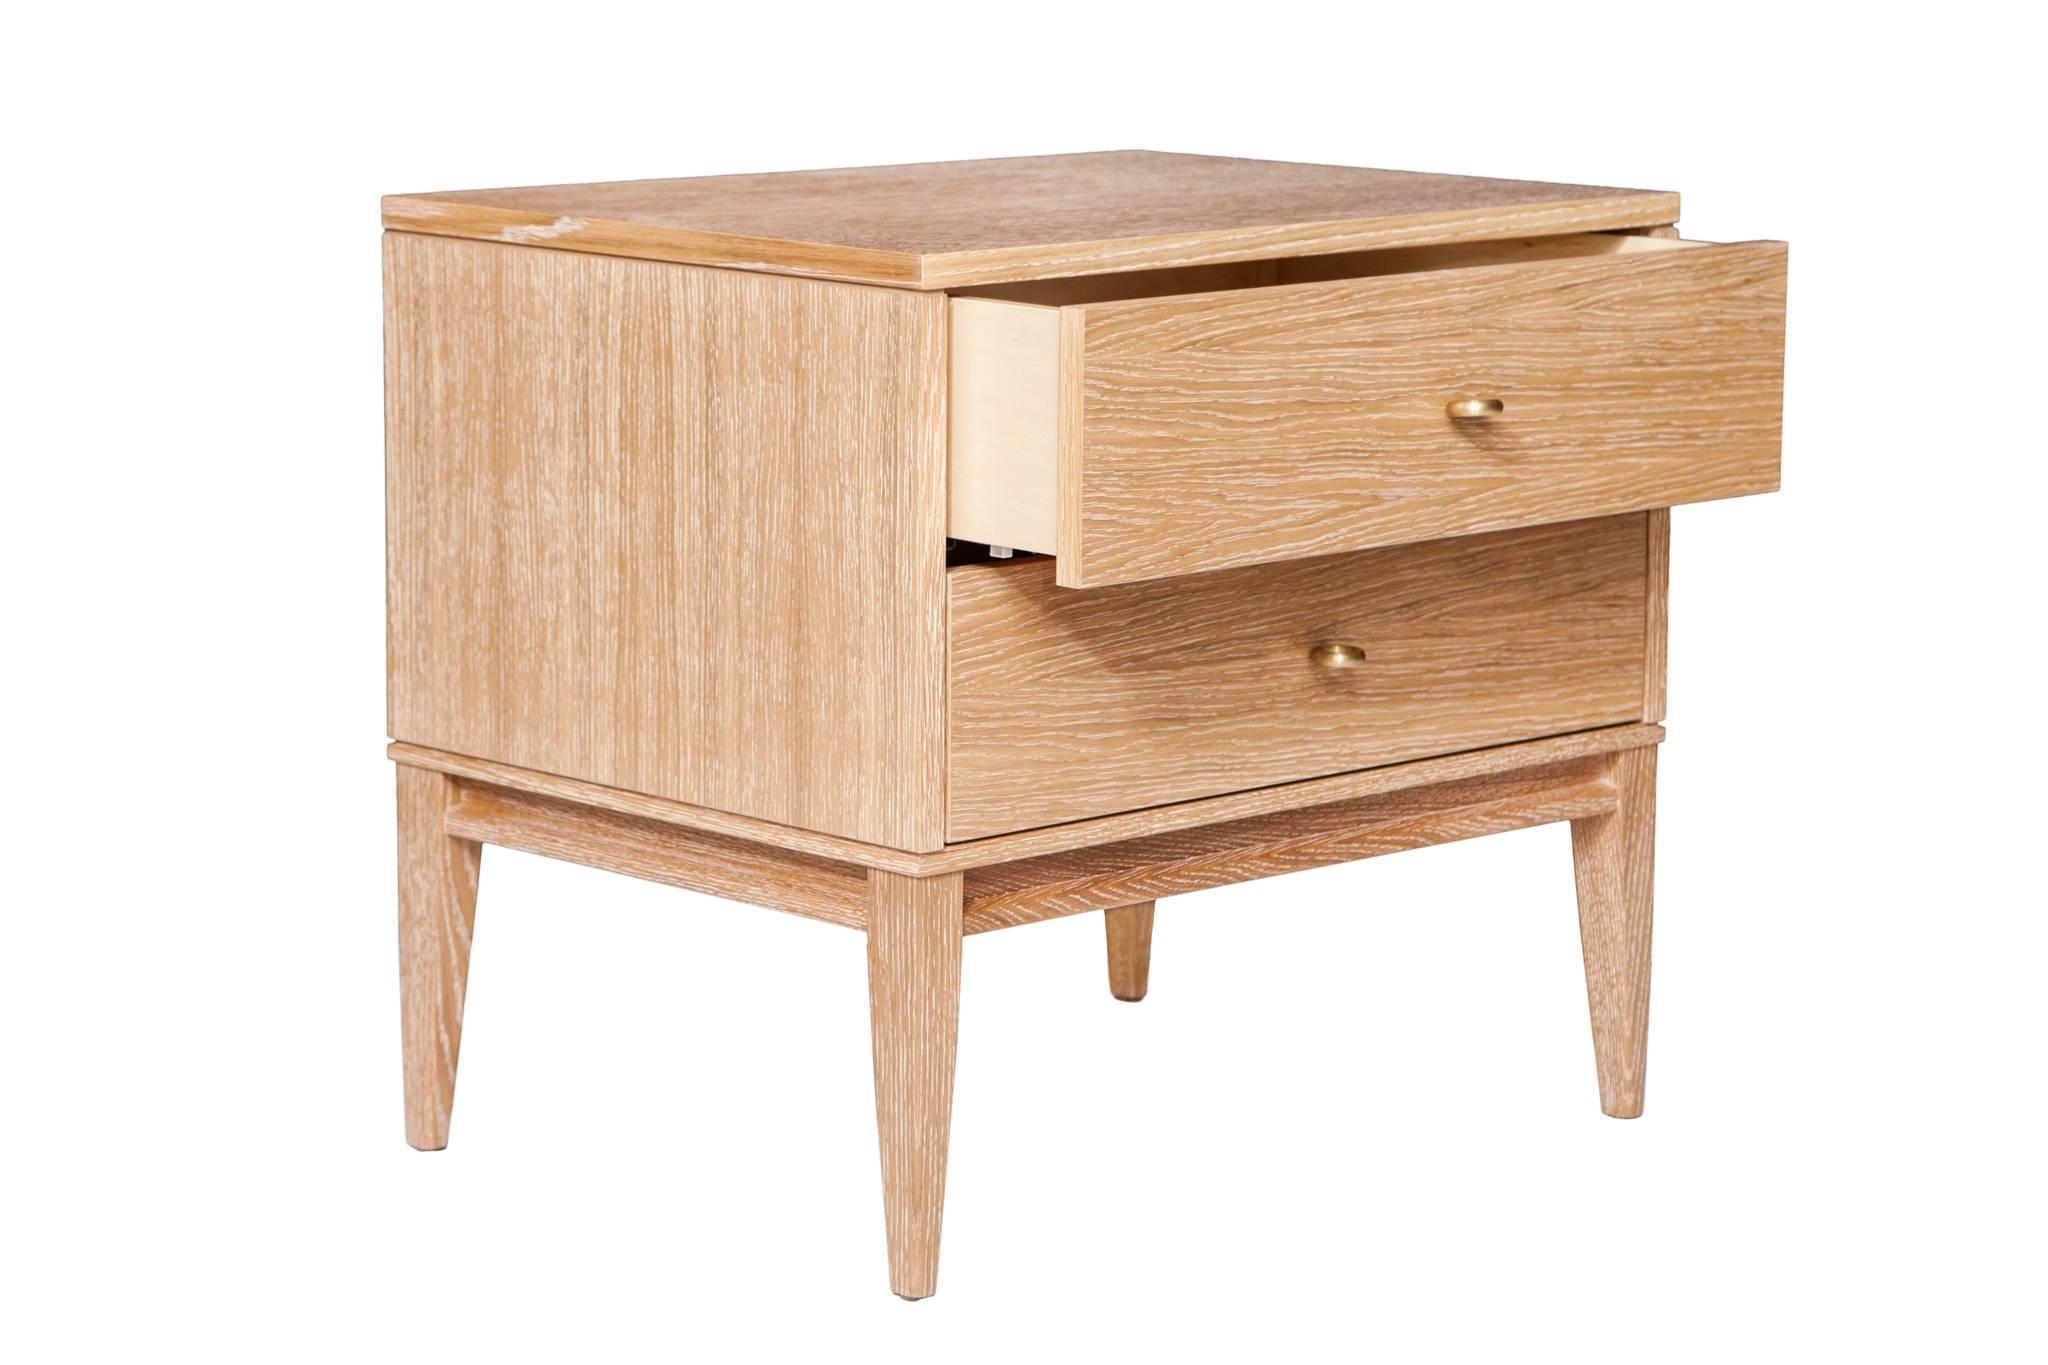 Cerused oak two-drawer nightstands on apron frame base detailed with solid brass drawer pulls. Solid maple drawer boxes with under-mount soft close mechanical drawer slides.
Custom lacquer and wood finishes available. 

Custom orders have a lead